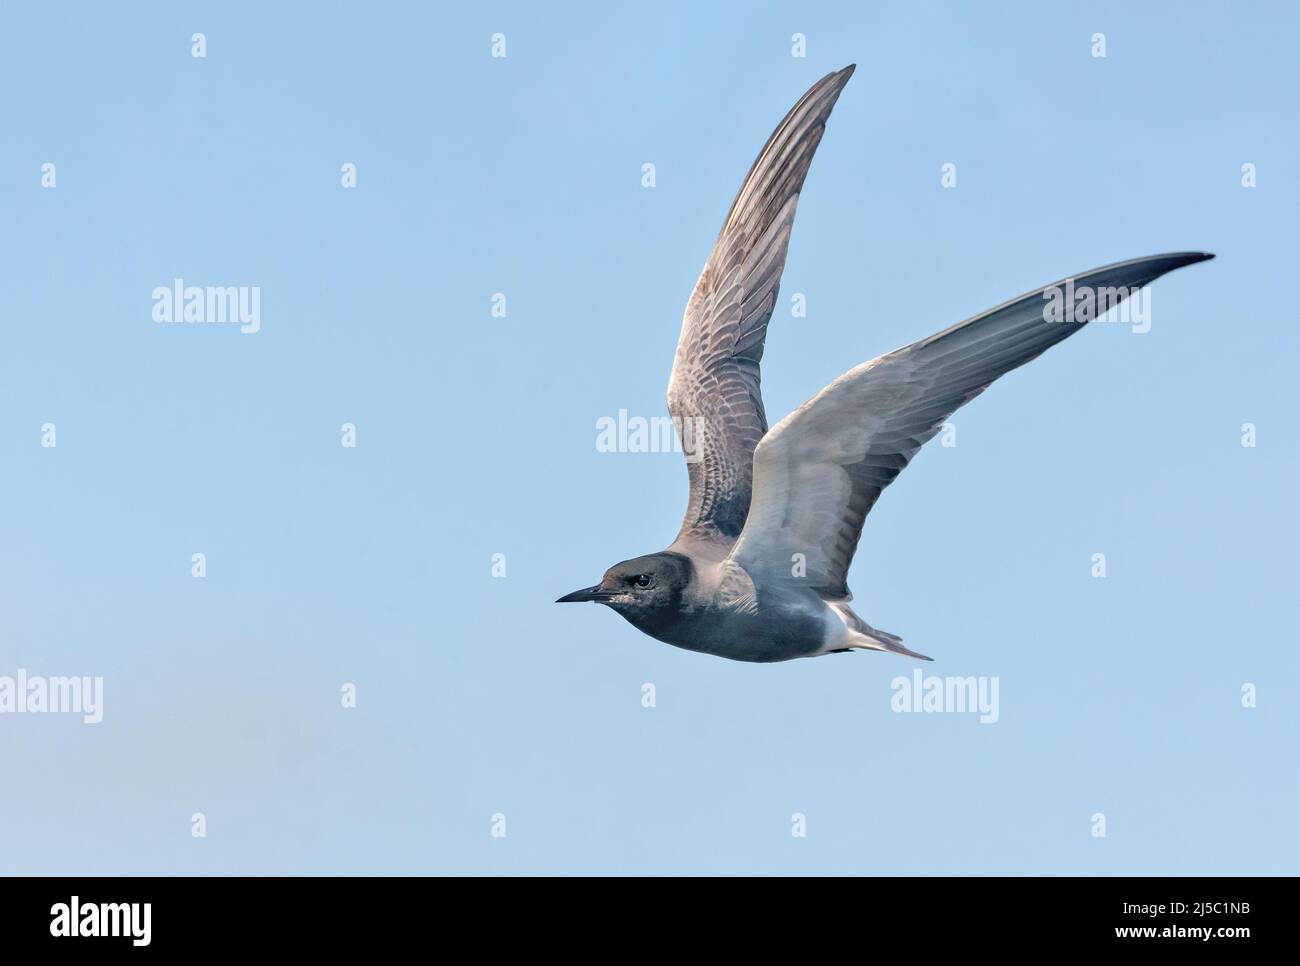 Adult Black tern (Chlidonias niger) flying in blue sky with lifted wings Stock Photo